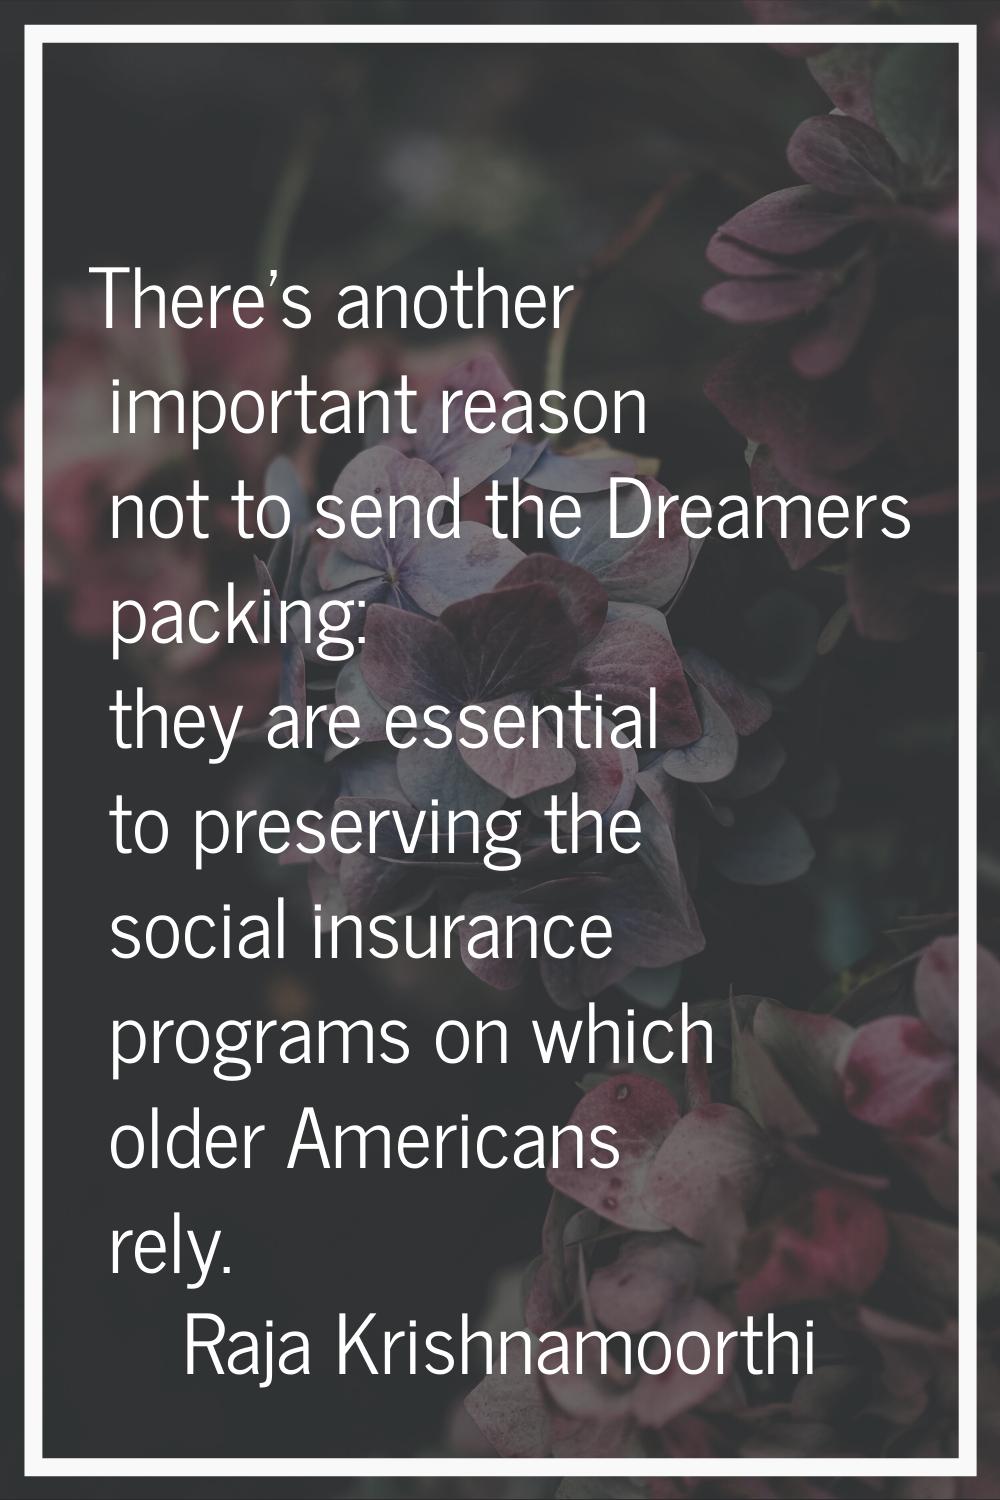 There's another important reason not to send the Dreamers packing: they are essential to preserving